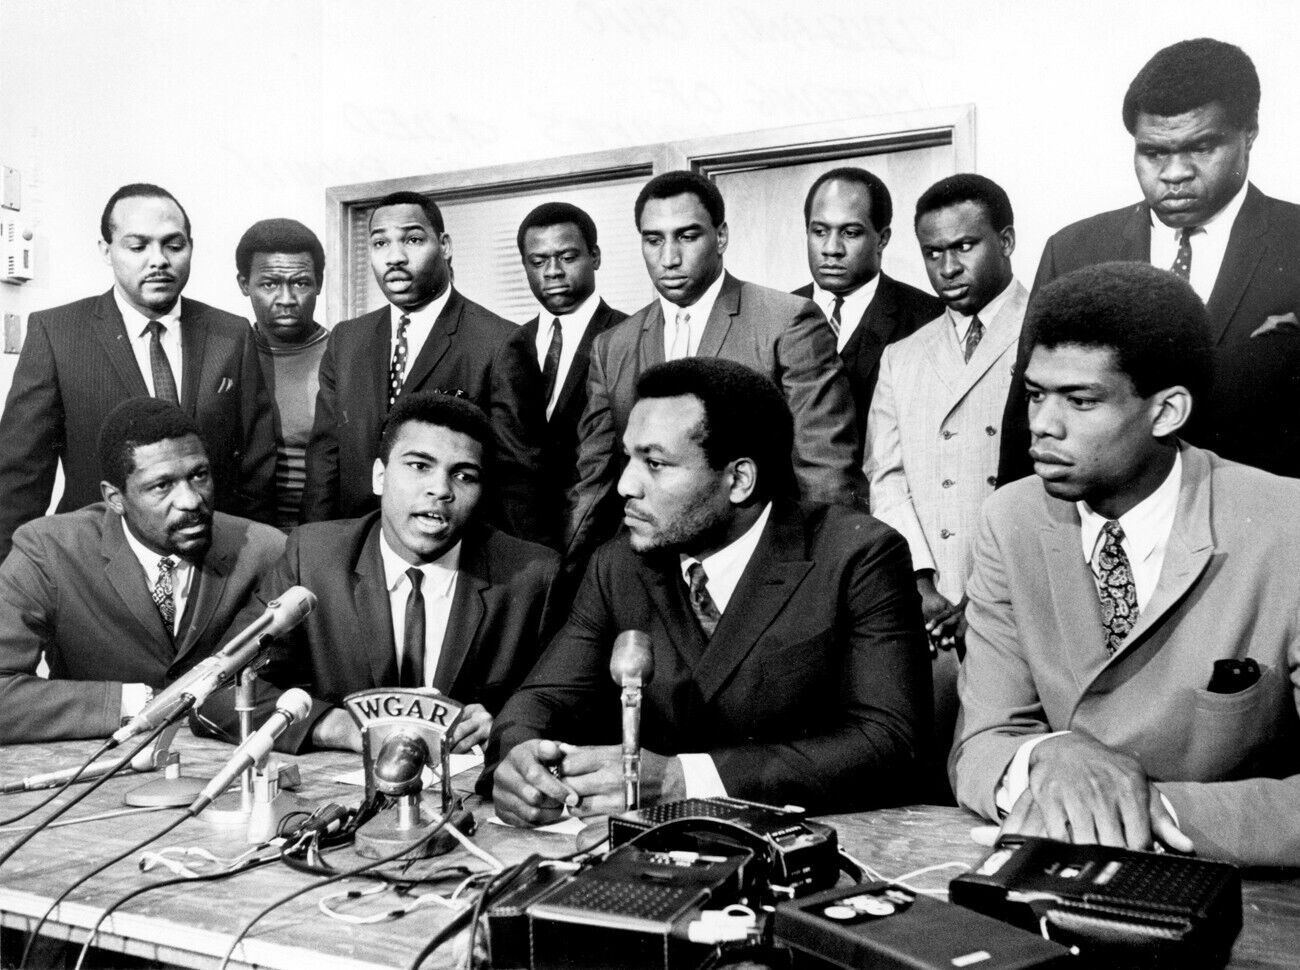 Athletes Jim Brown Mohammad Ali Civil Rights Summit Picture Photo Print 11\